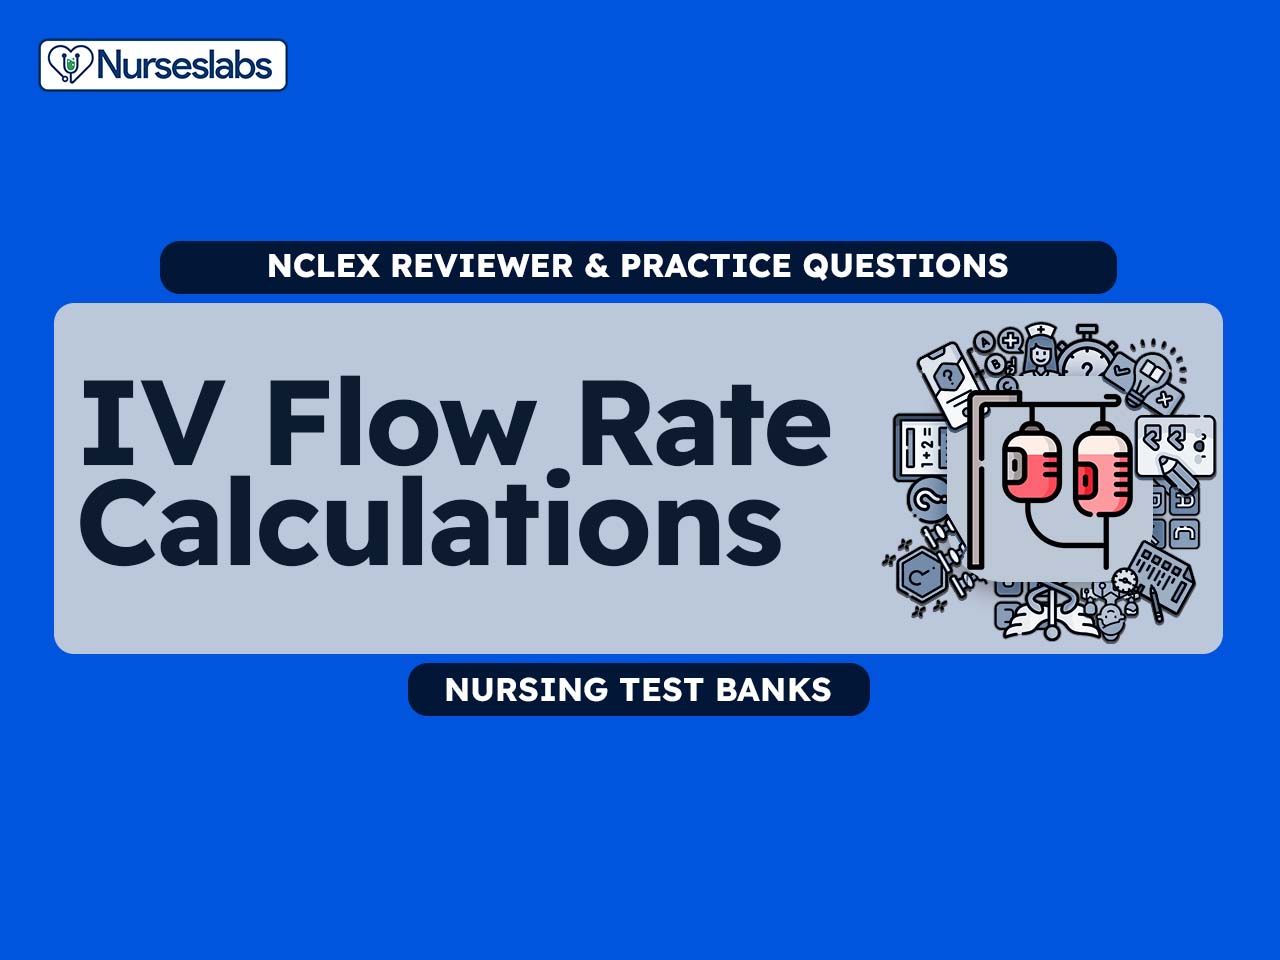 IV Flow Rate Calculation Reviewer & Quiz (60 Questions) - Nurseslabs